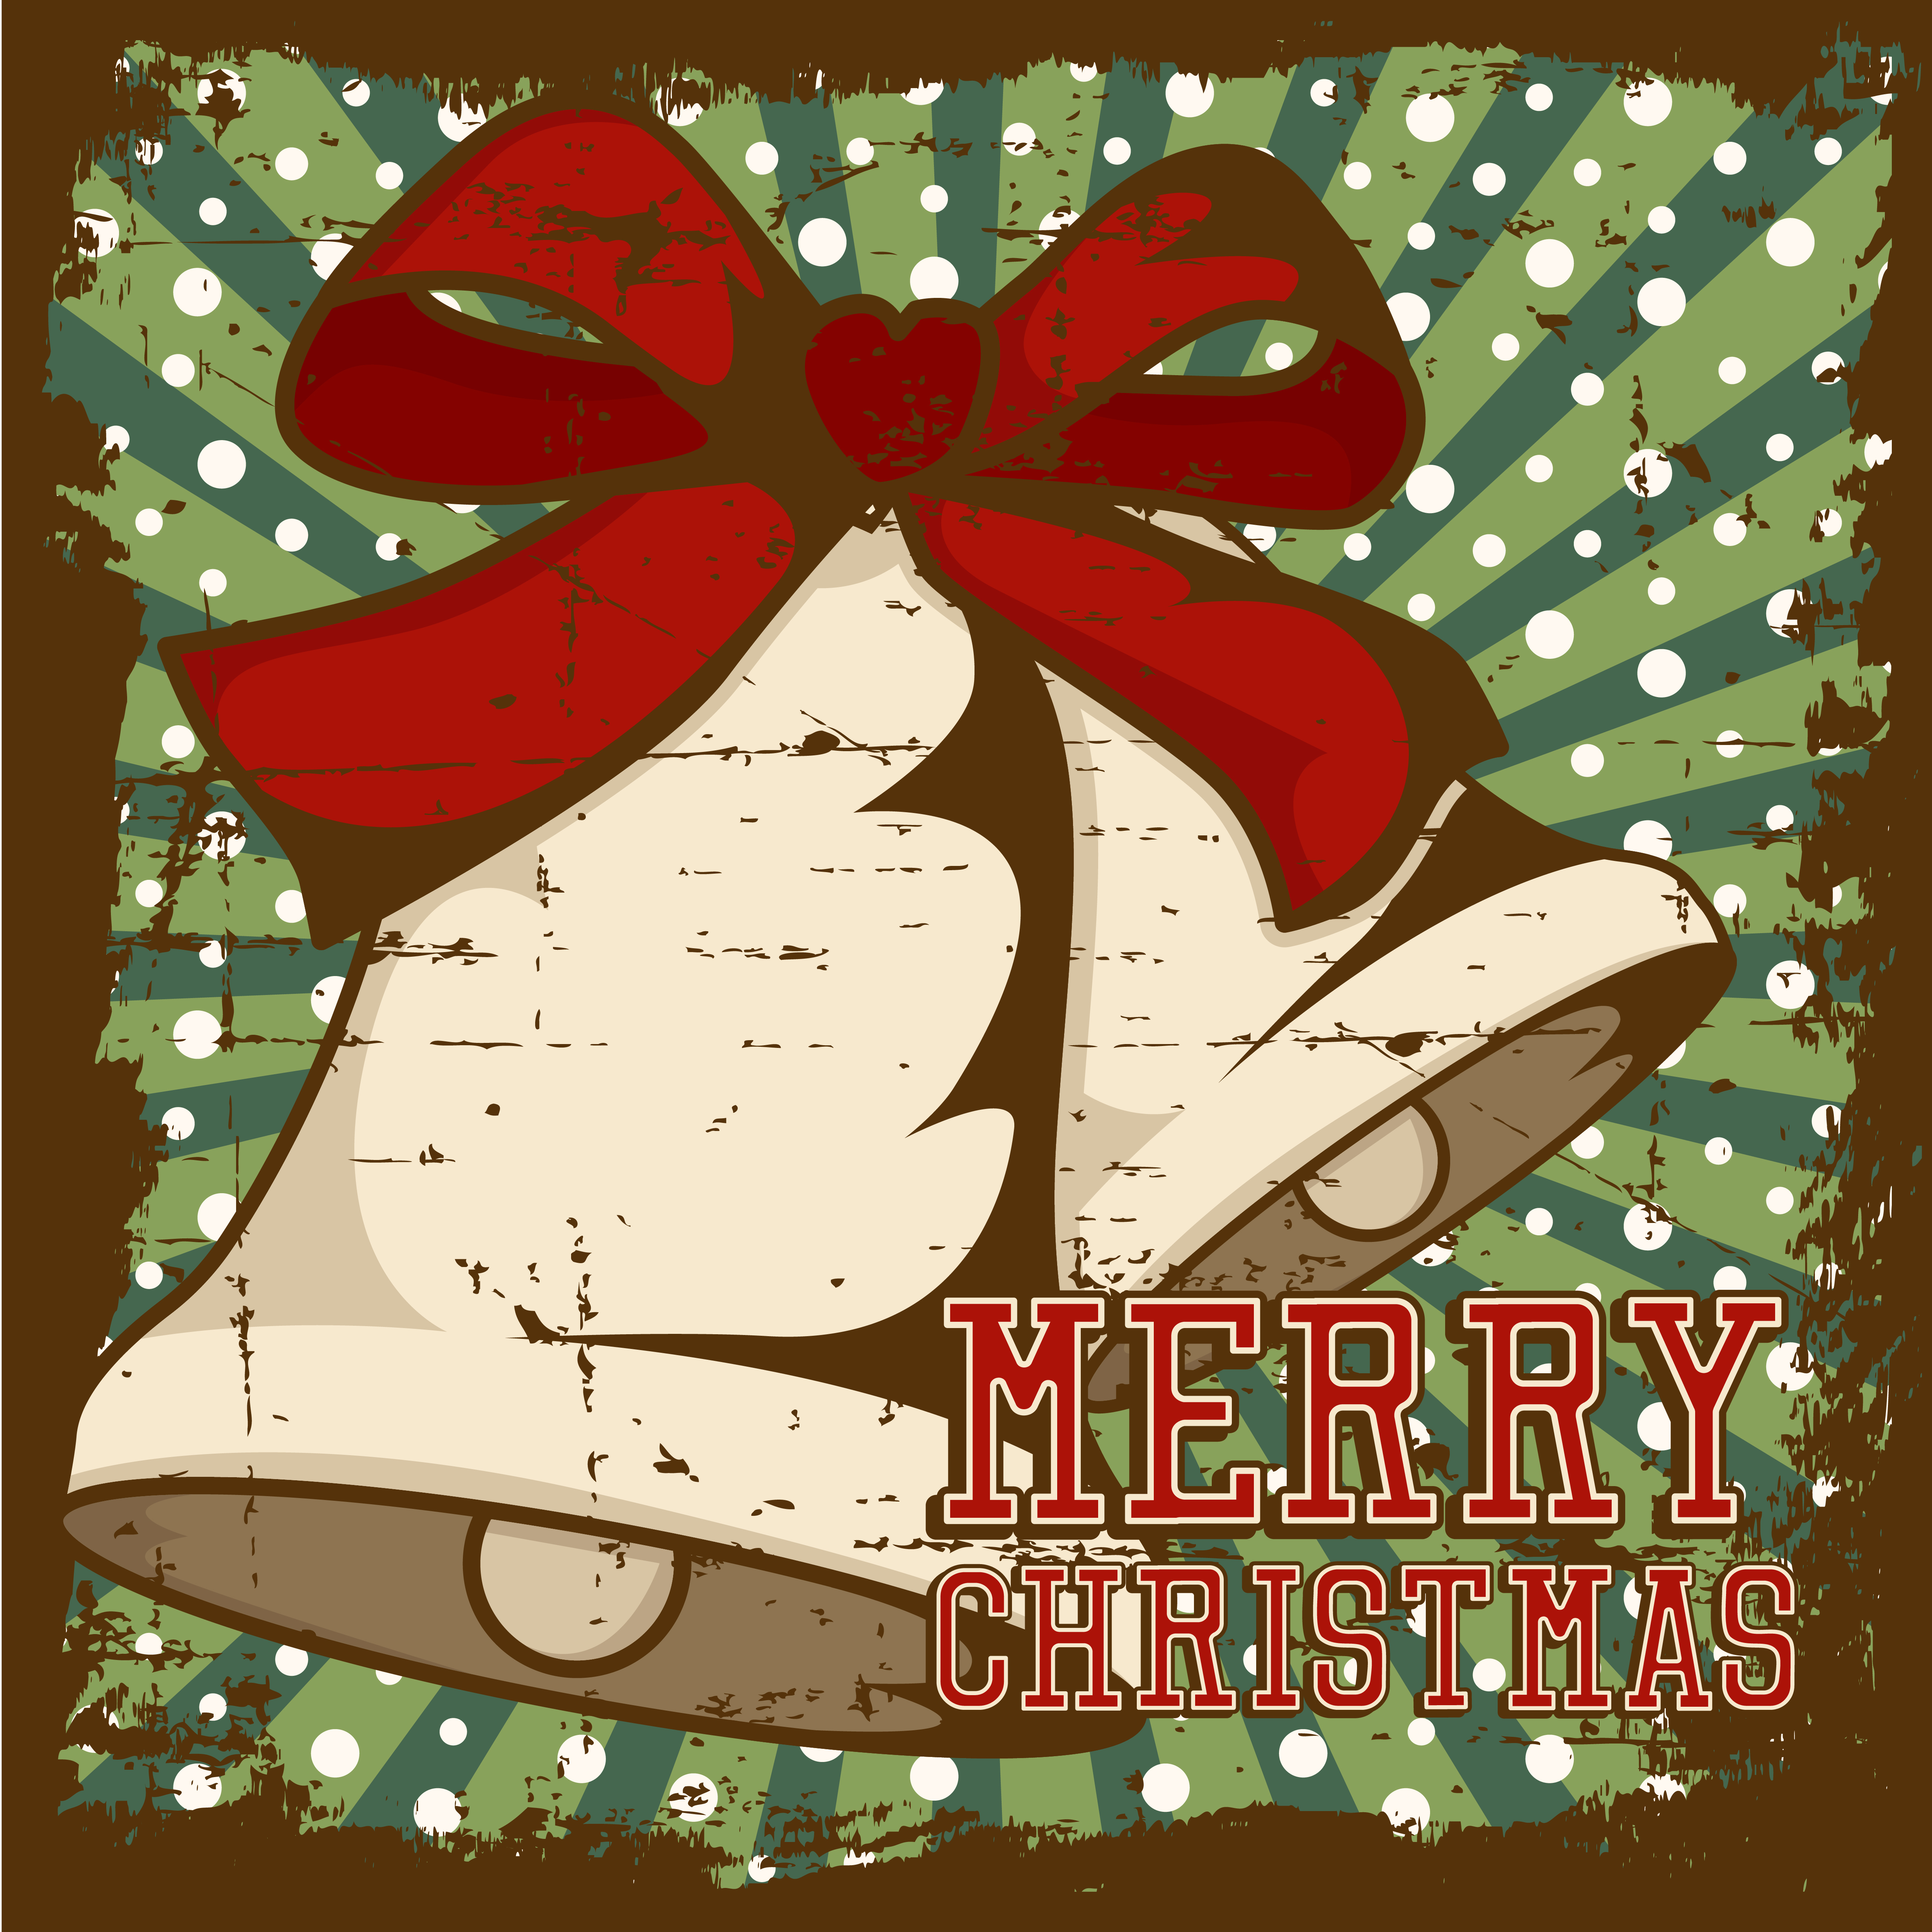 Download Merry Christmas Vintage Signage Poster Rustic - Download ...